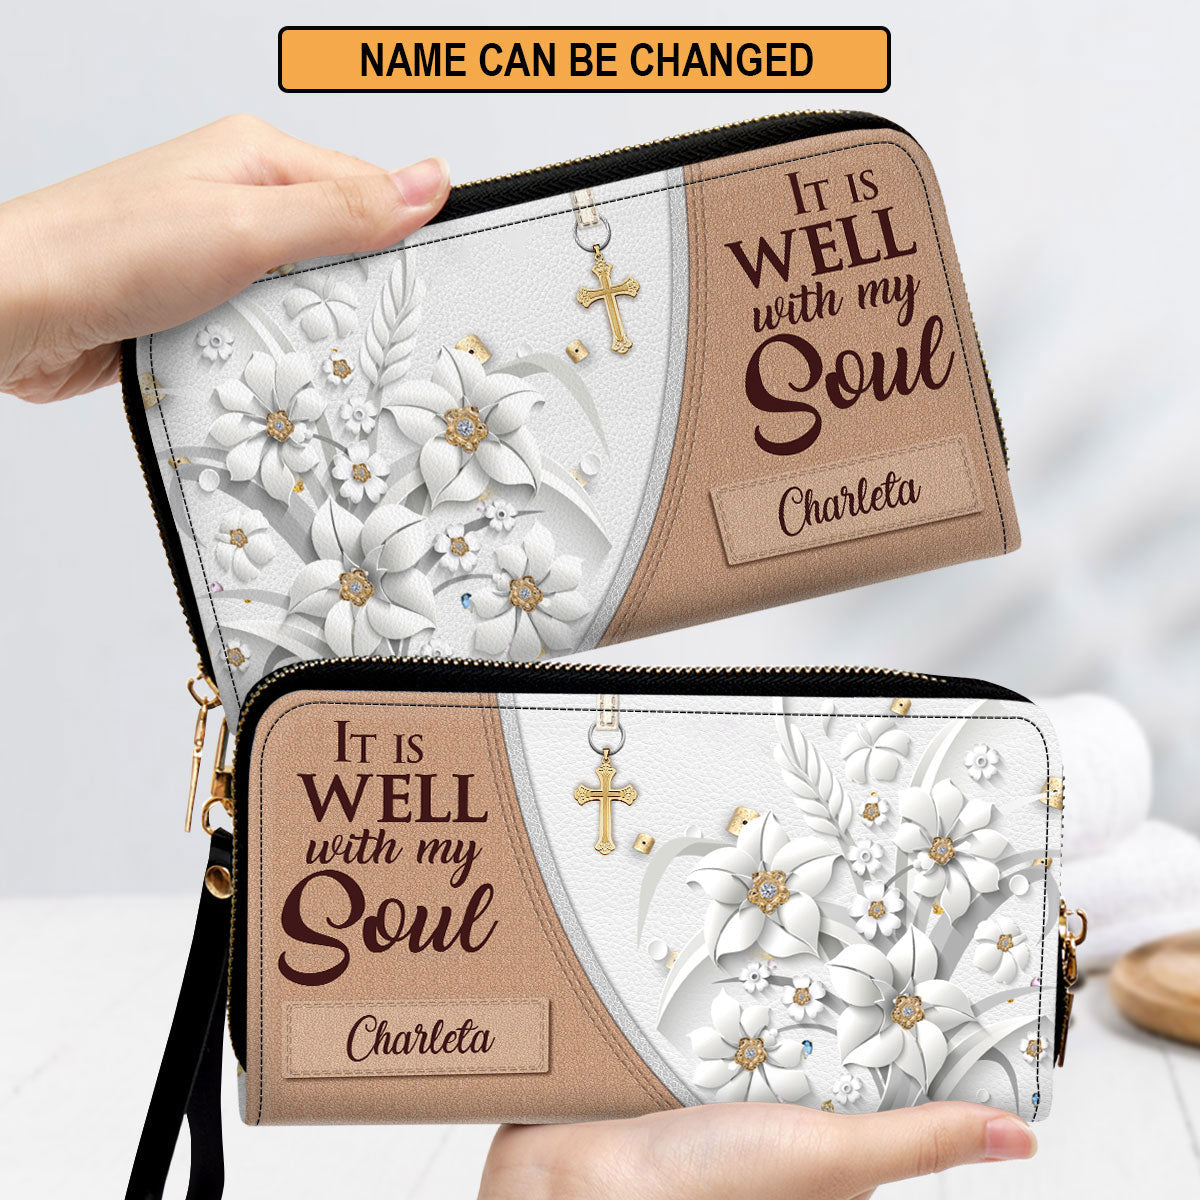 Women Clutch Purse - It Is Well With My Soul - Special Personalized Butterfly Clutch Purse